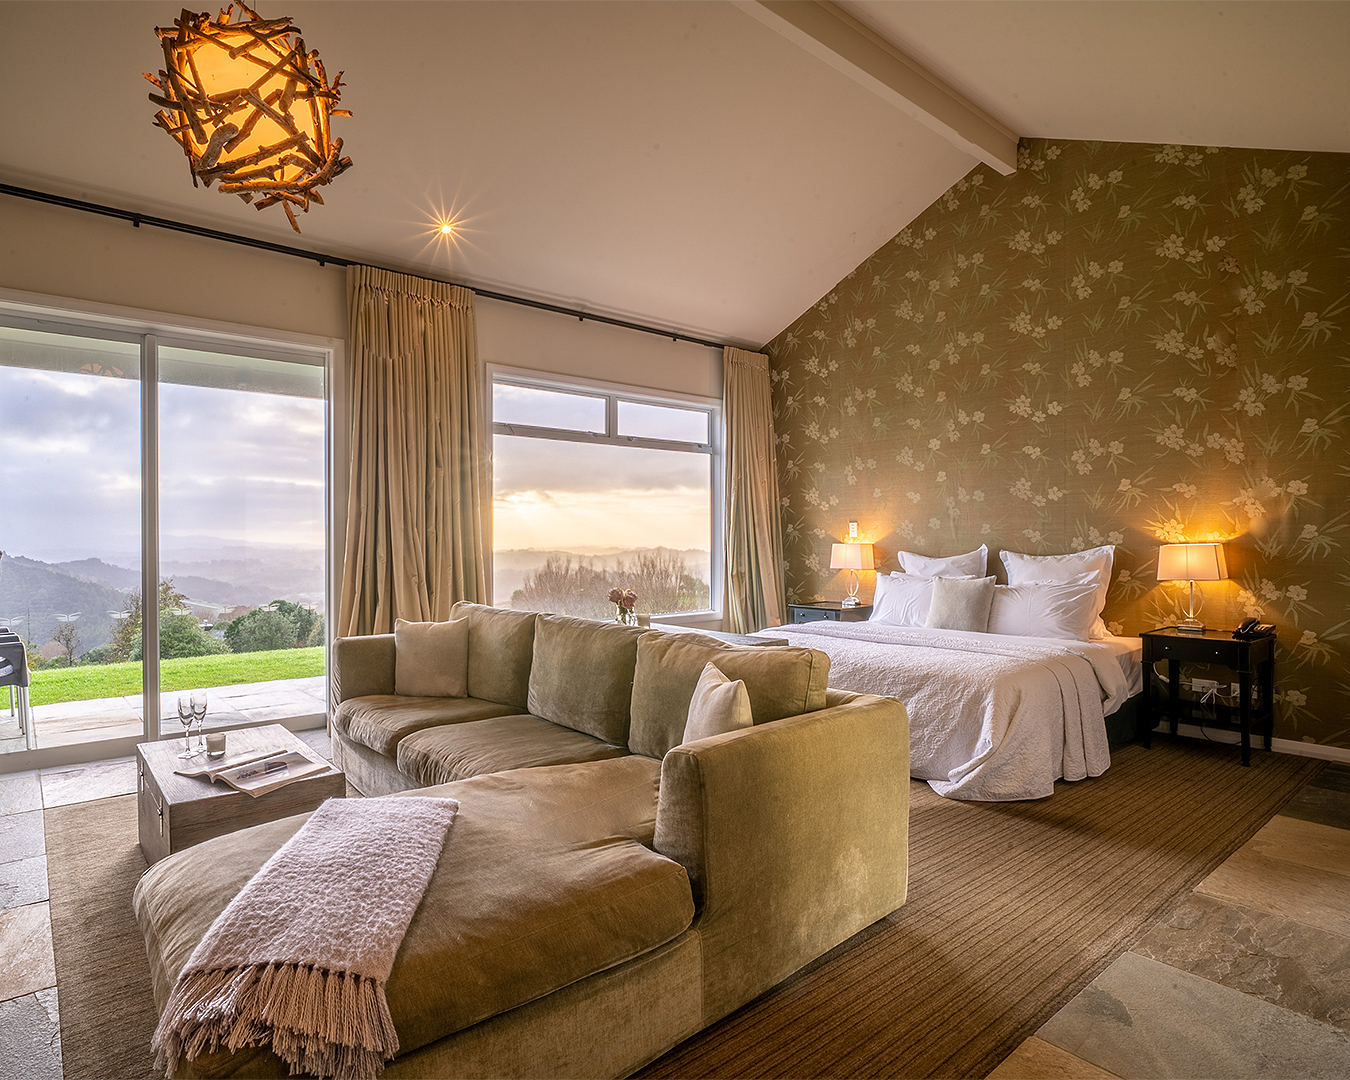 A sumptuous room at the Woodhouse Mountain Lodge, one of the best luxury hotels in New Zealand.